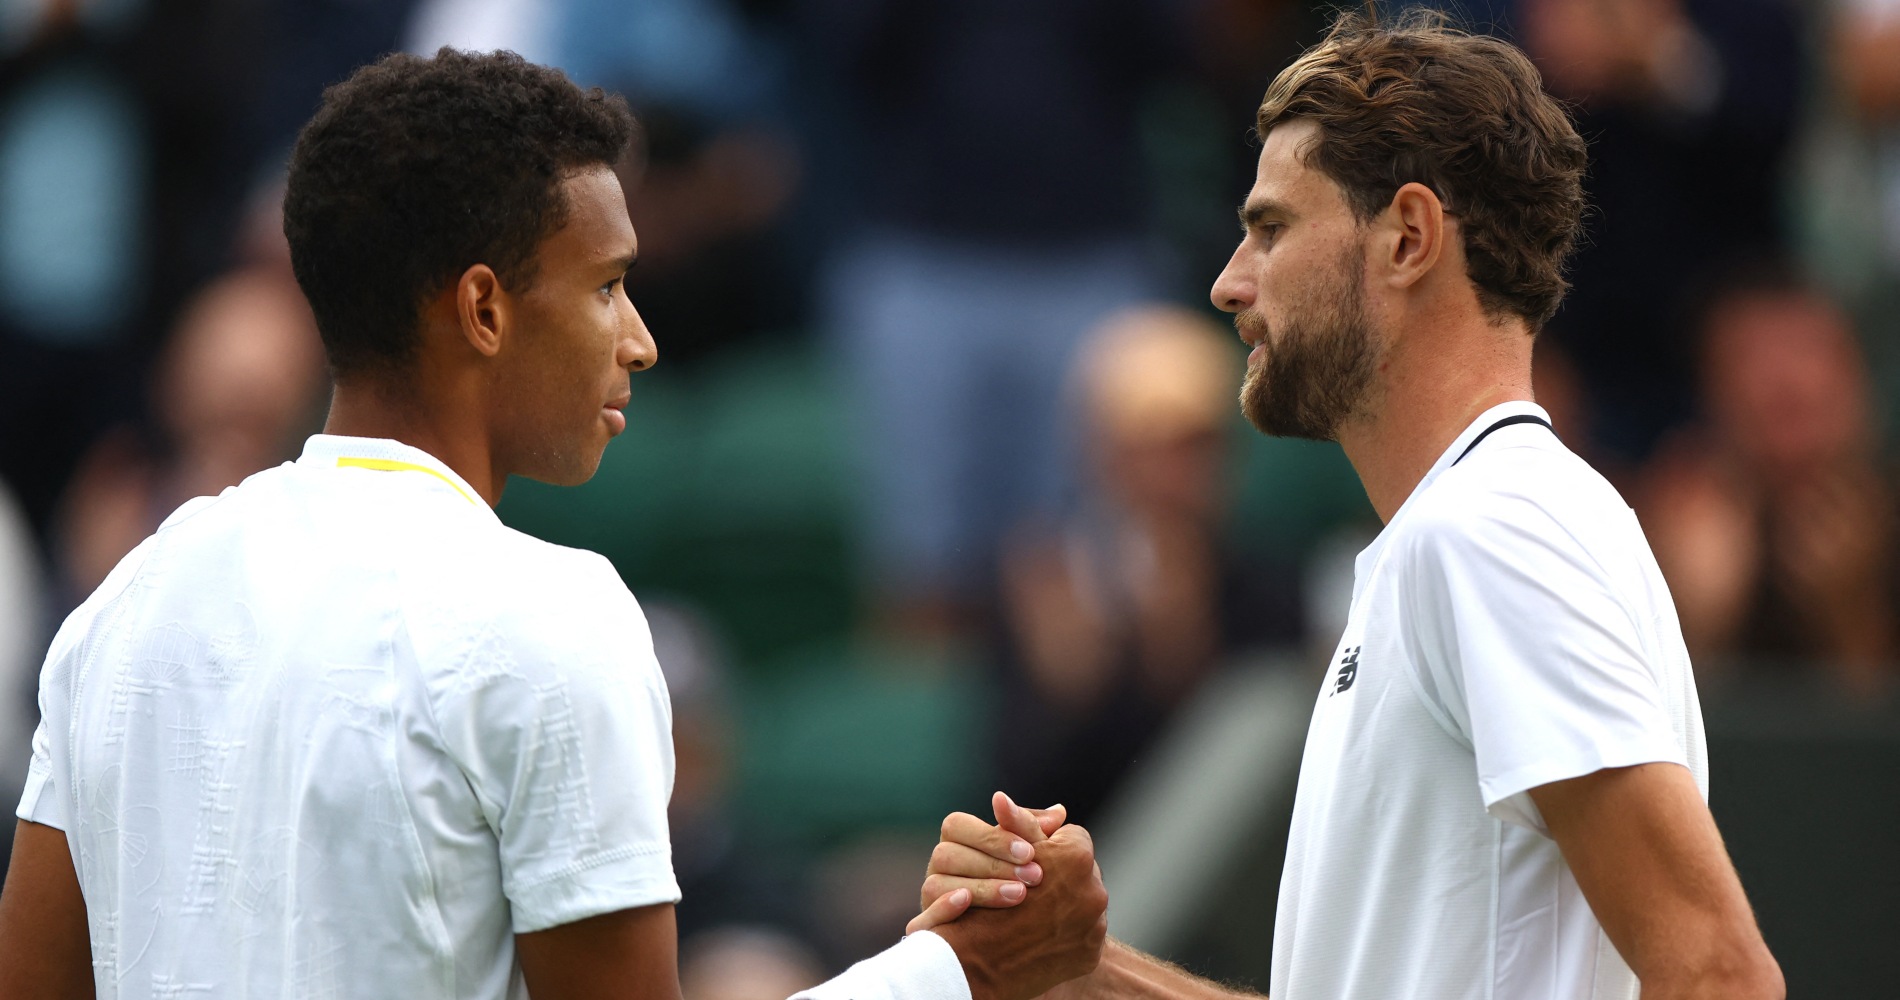 Felix Auger-Aliassime and Maxime Cressy